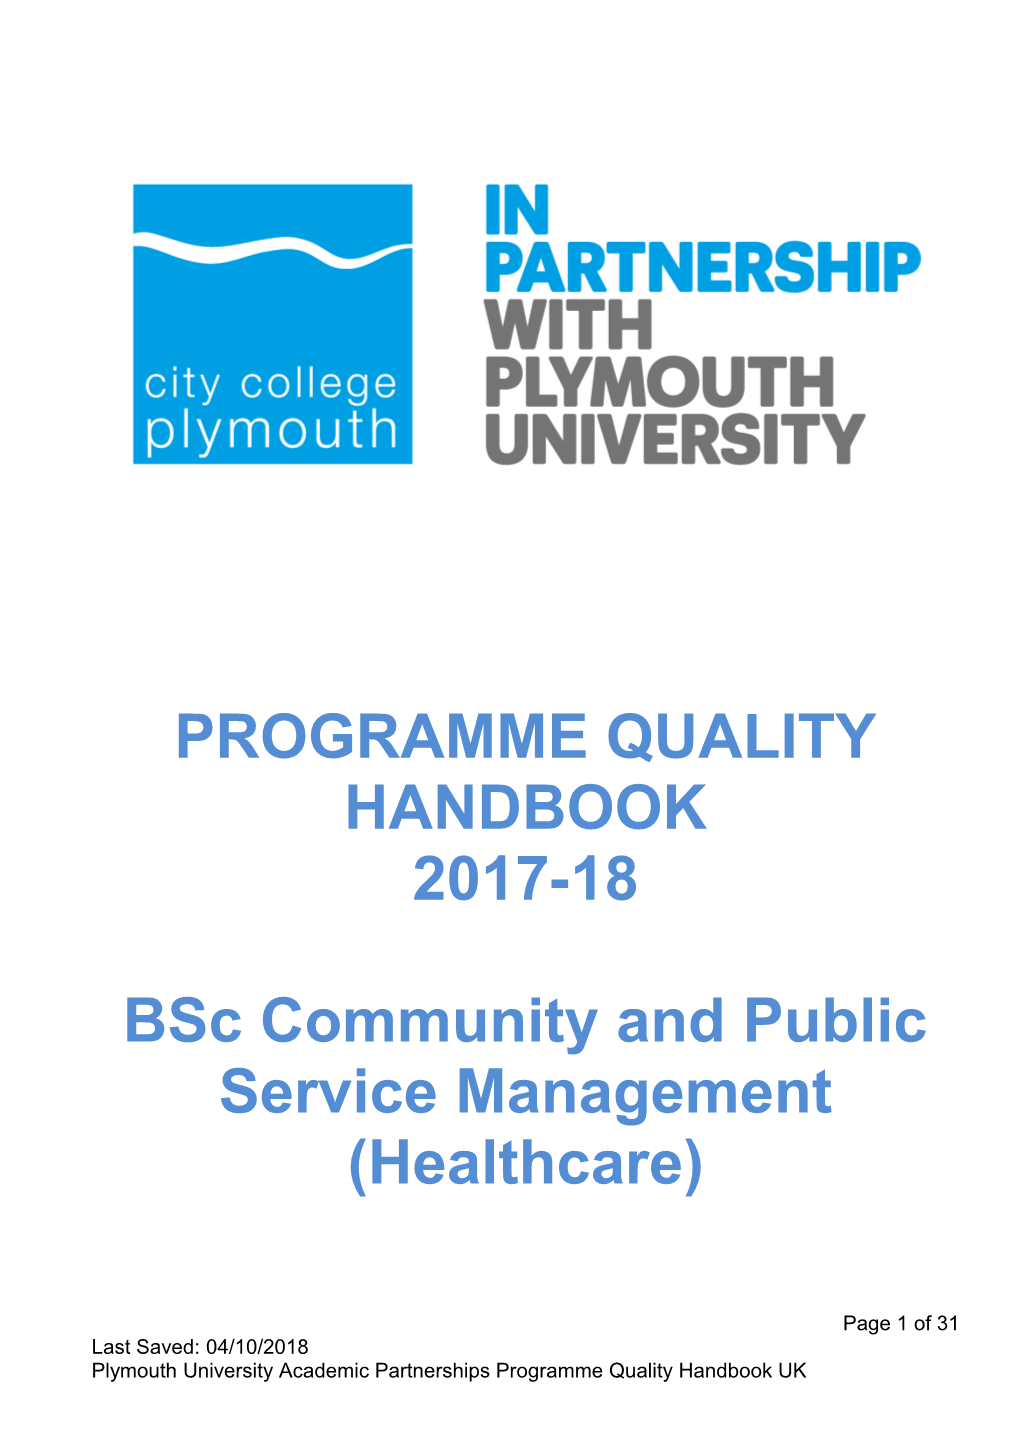 Bsc Community and Public Service Management (Healthcare)